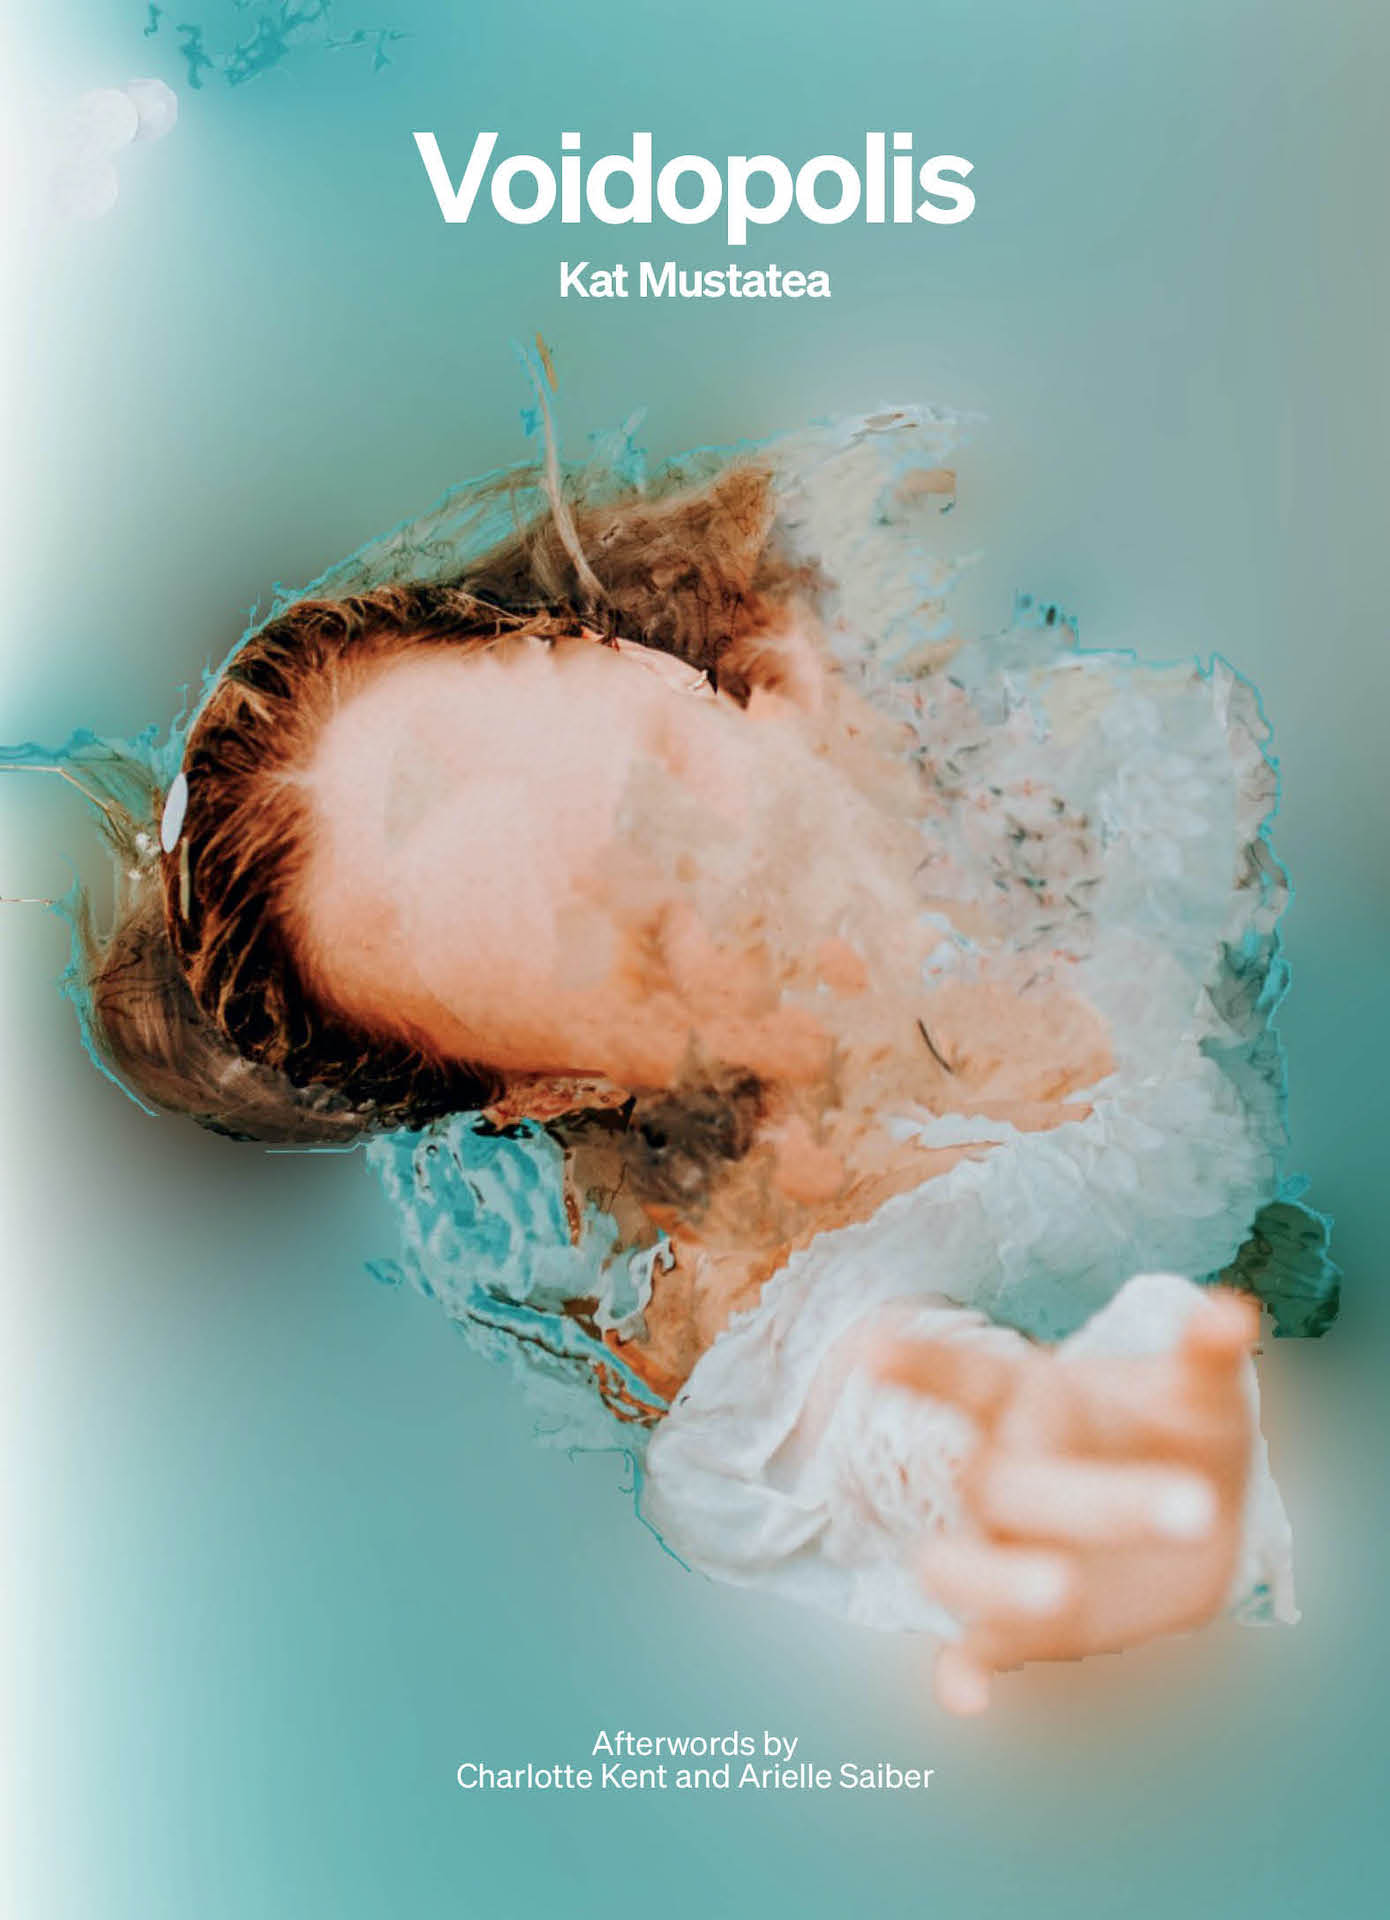 Book cover for Voidopolis showing a faceless person breaking through a water surface